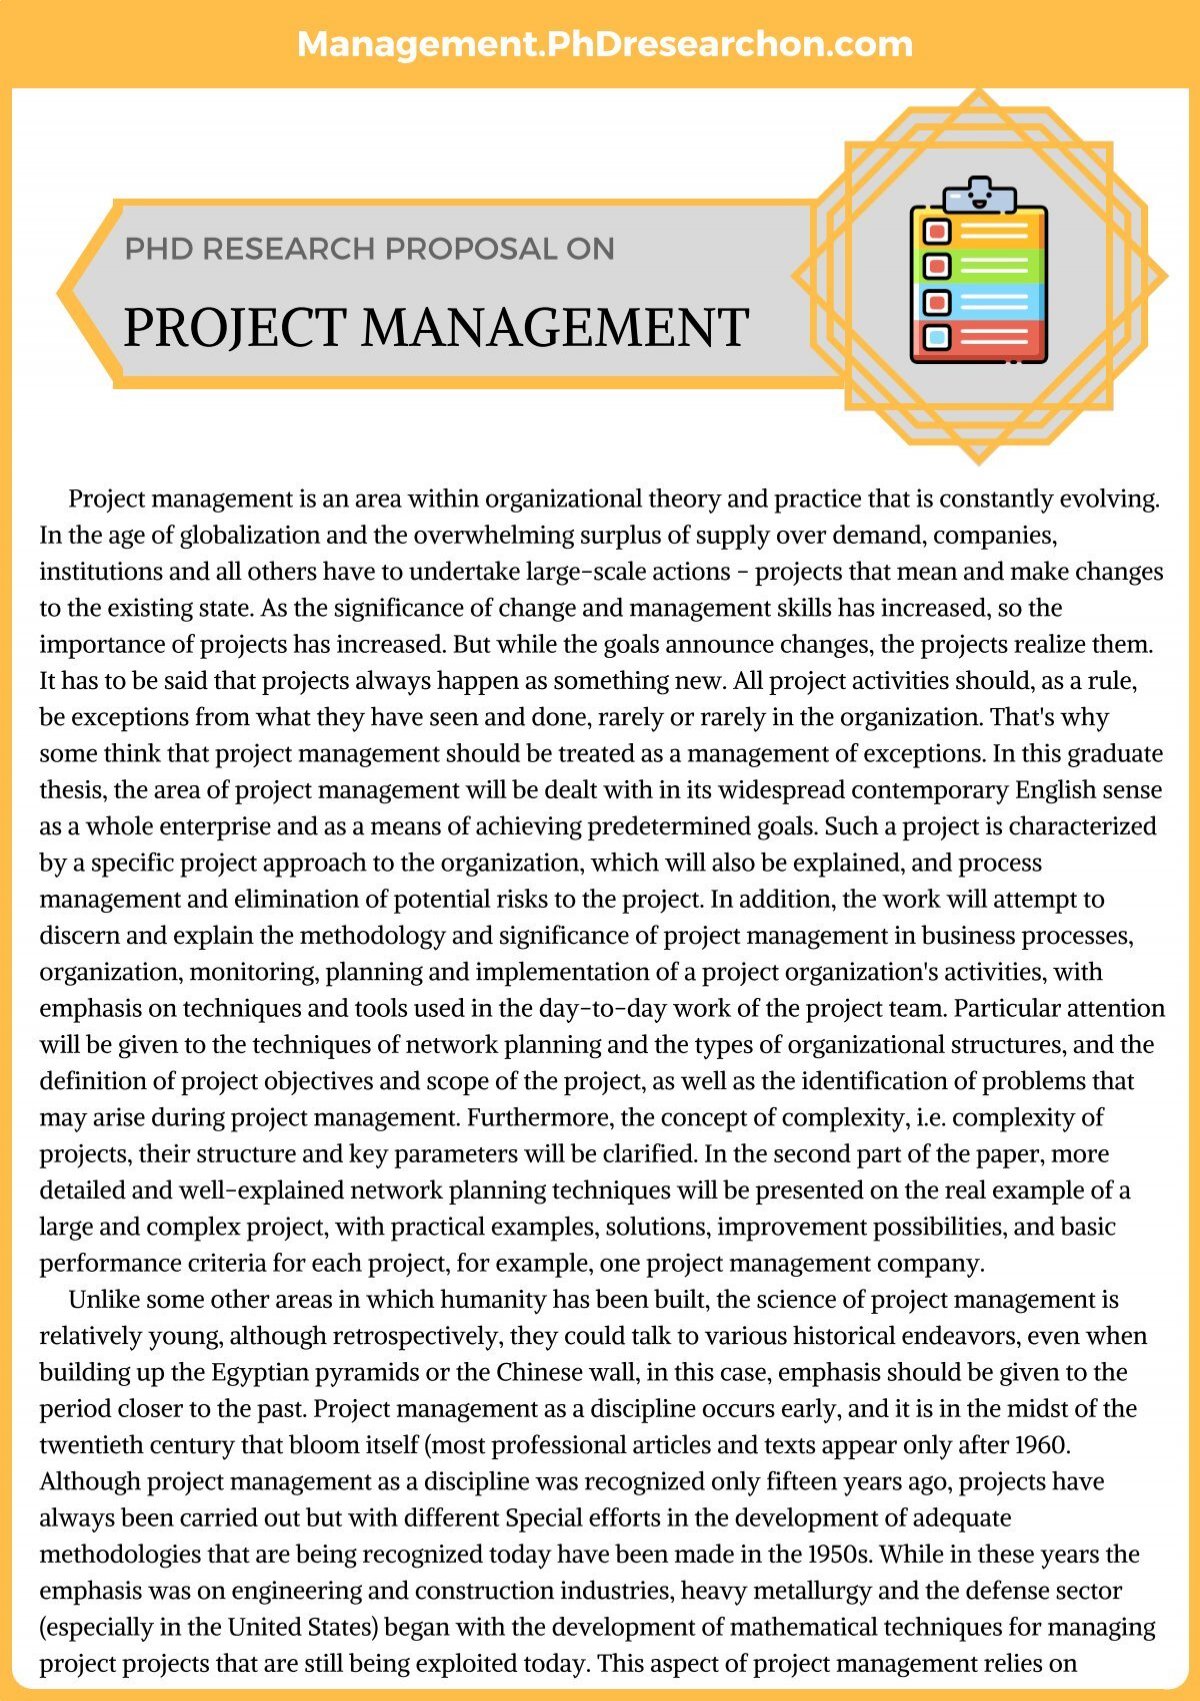 phd in project management ireland